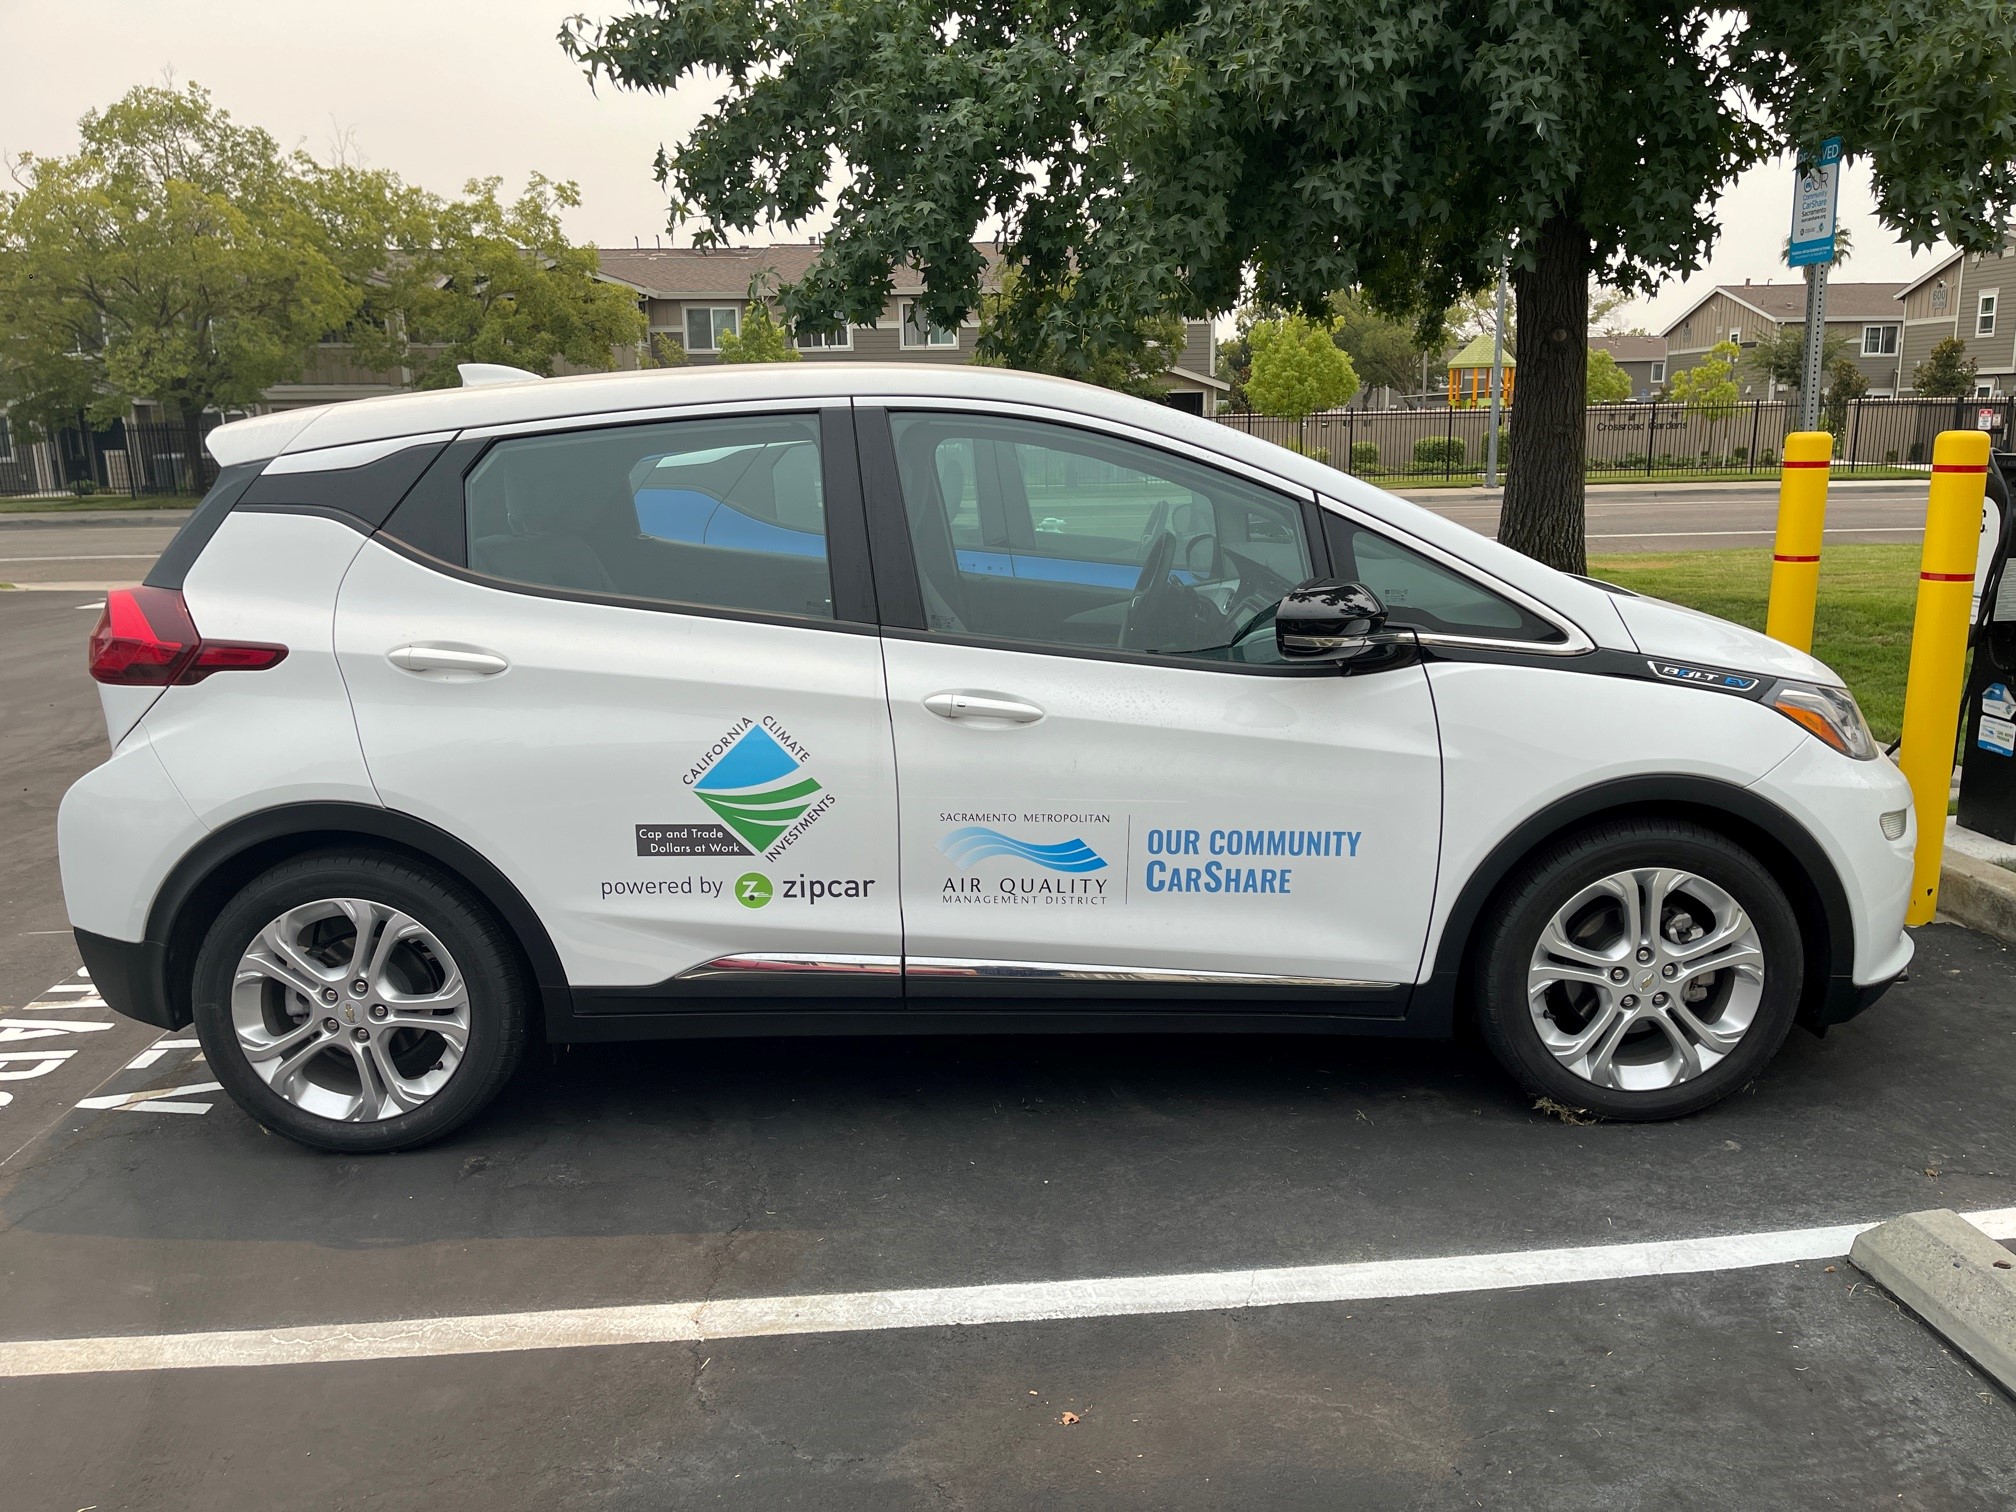 Side view of parked, white Chevy Bolt with Our Community Carshare logo